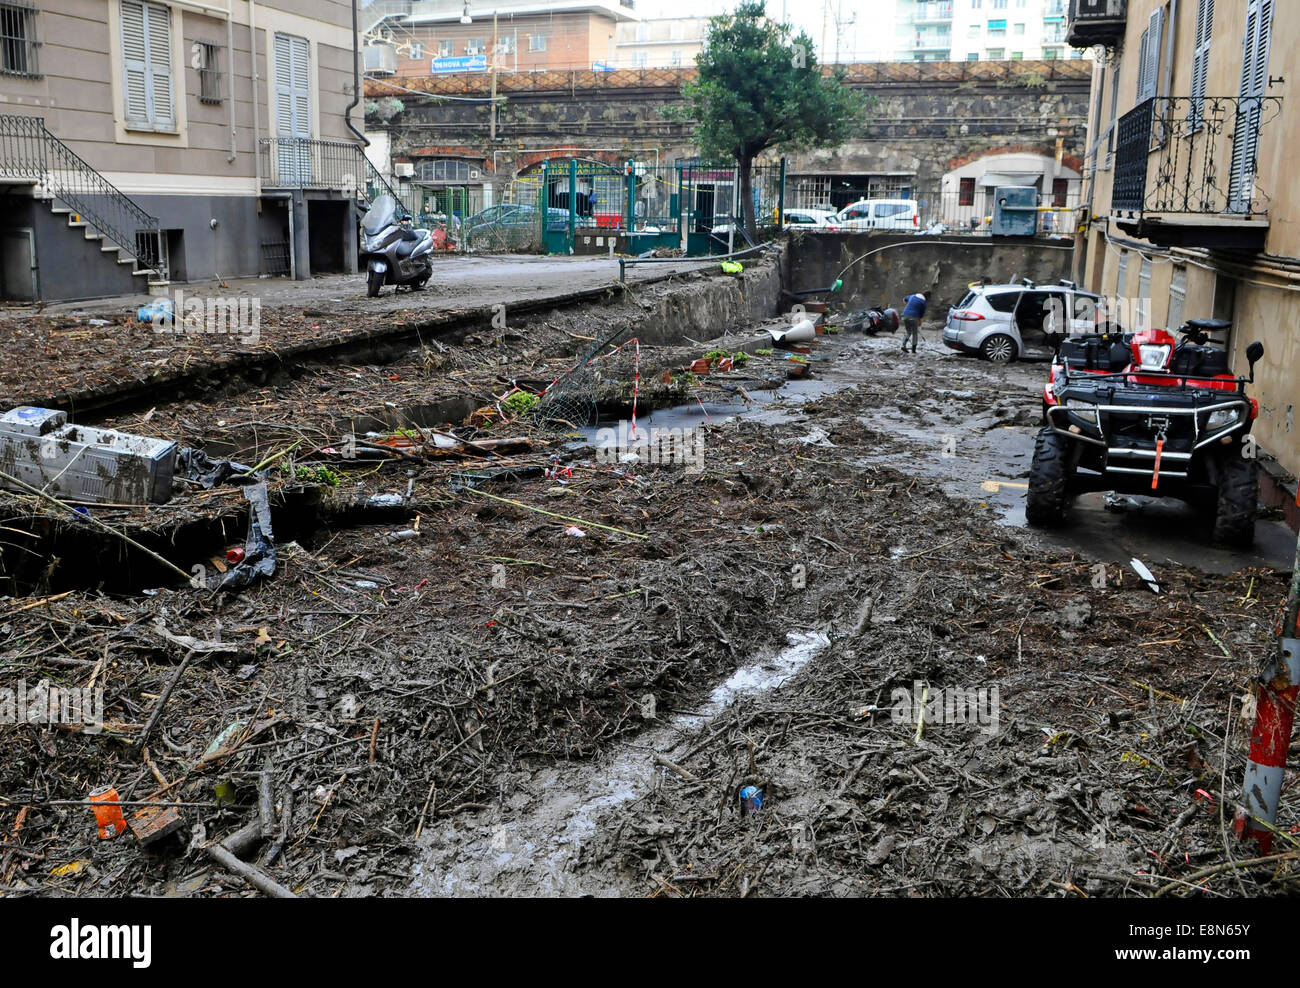 Genoa, Italy. 11th Oct, 2014. Aftermath of the flooding. At least one person died when flash floods swept through the northwestern Italian city of Genoa. Shop windows were smashed, cars washed aside and many streets were left knee deep in muddy water. Credit:  Massimo Piacentino/Alamy Live News Stock Photo